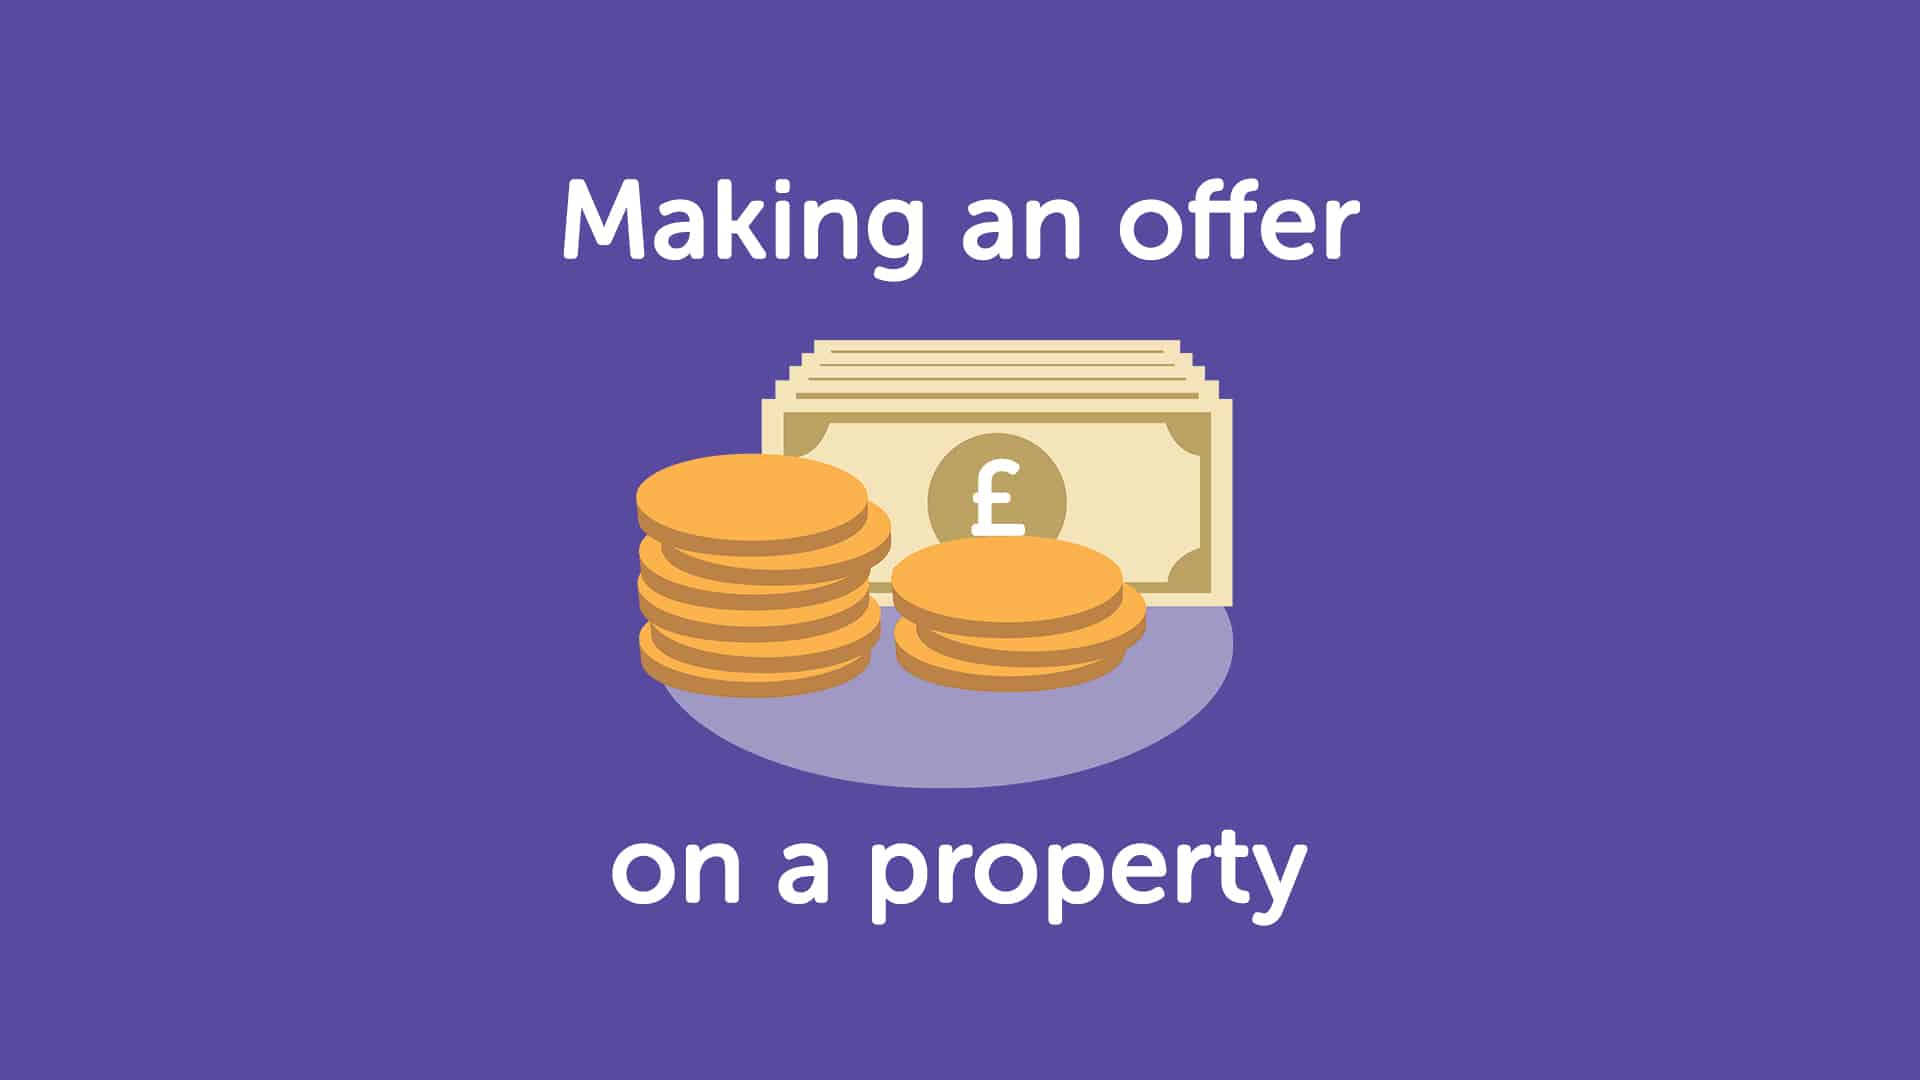 How to Make an Offer on a Property in Leicester?